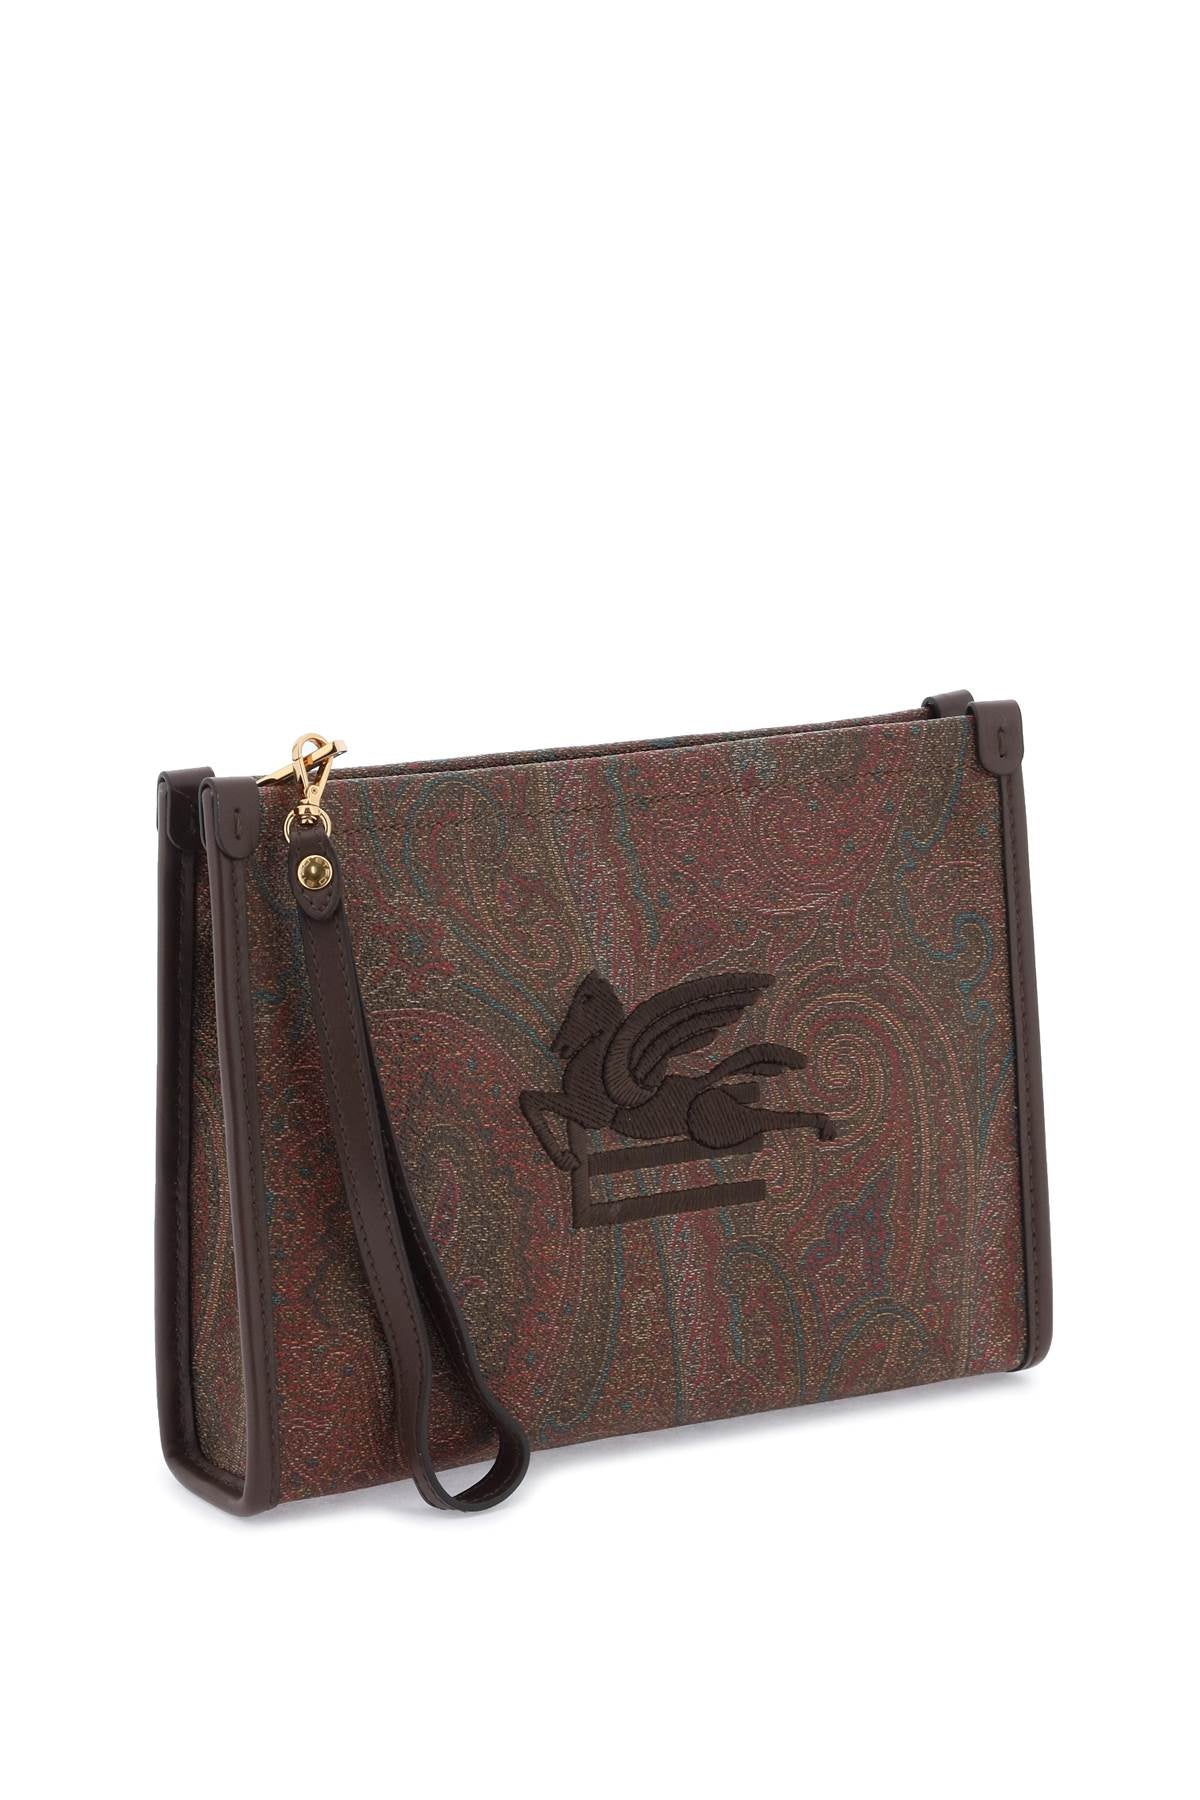 Etro paisley pouch with embroidery-2